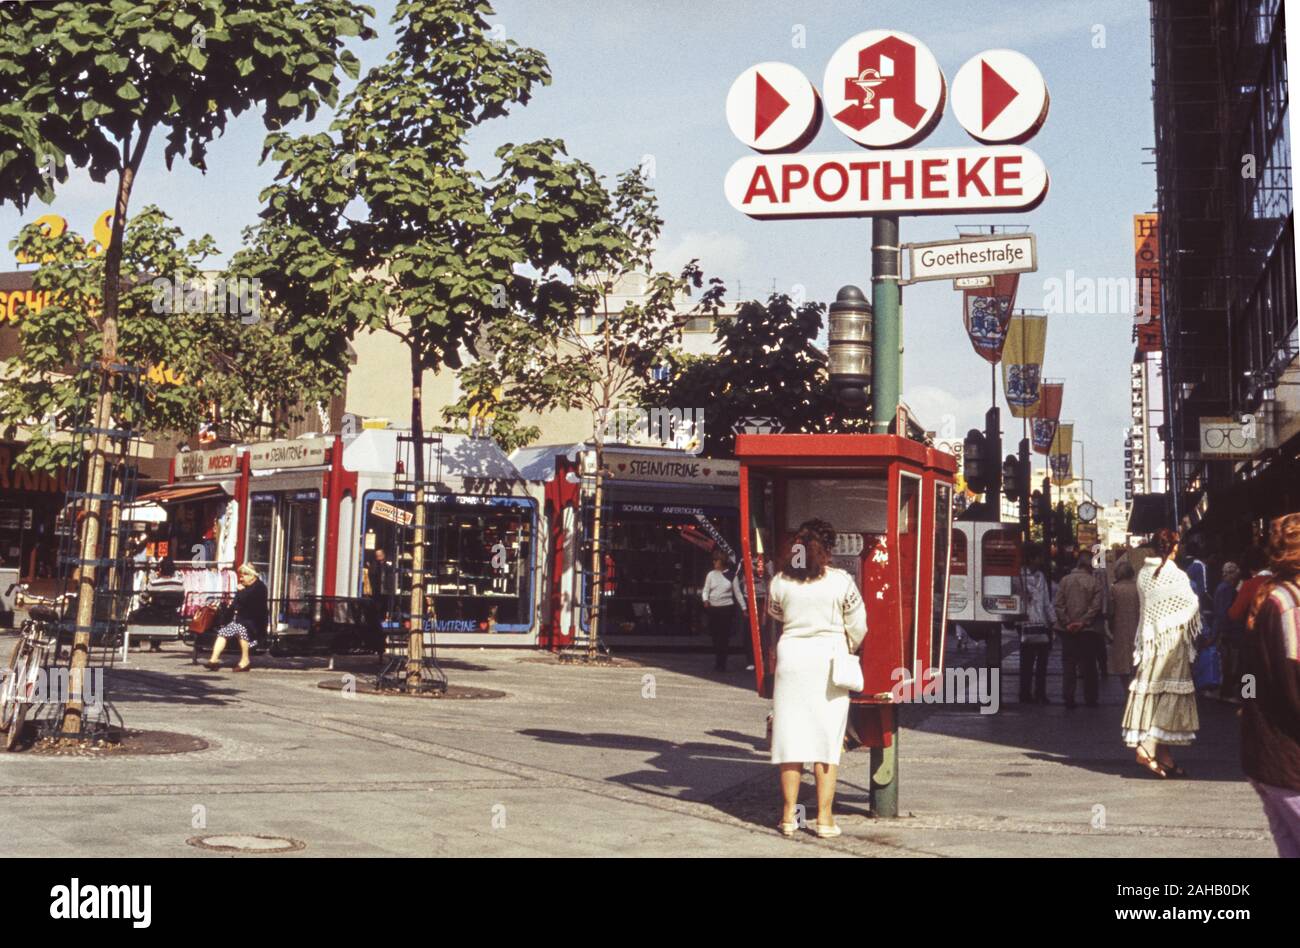 Archival image of the shopping precinct with large Apotheke (pharmacy) signage along Goethestrasse in Berlin Charlottenburg ca.1986, Berlin, Germany Stock Photo